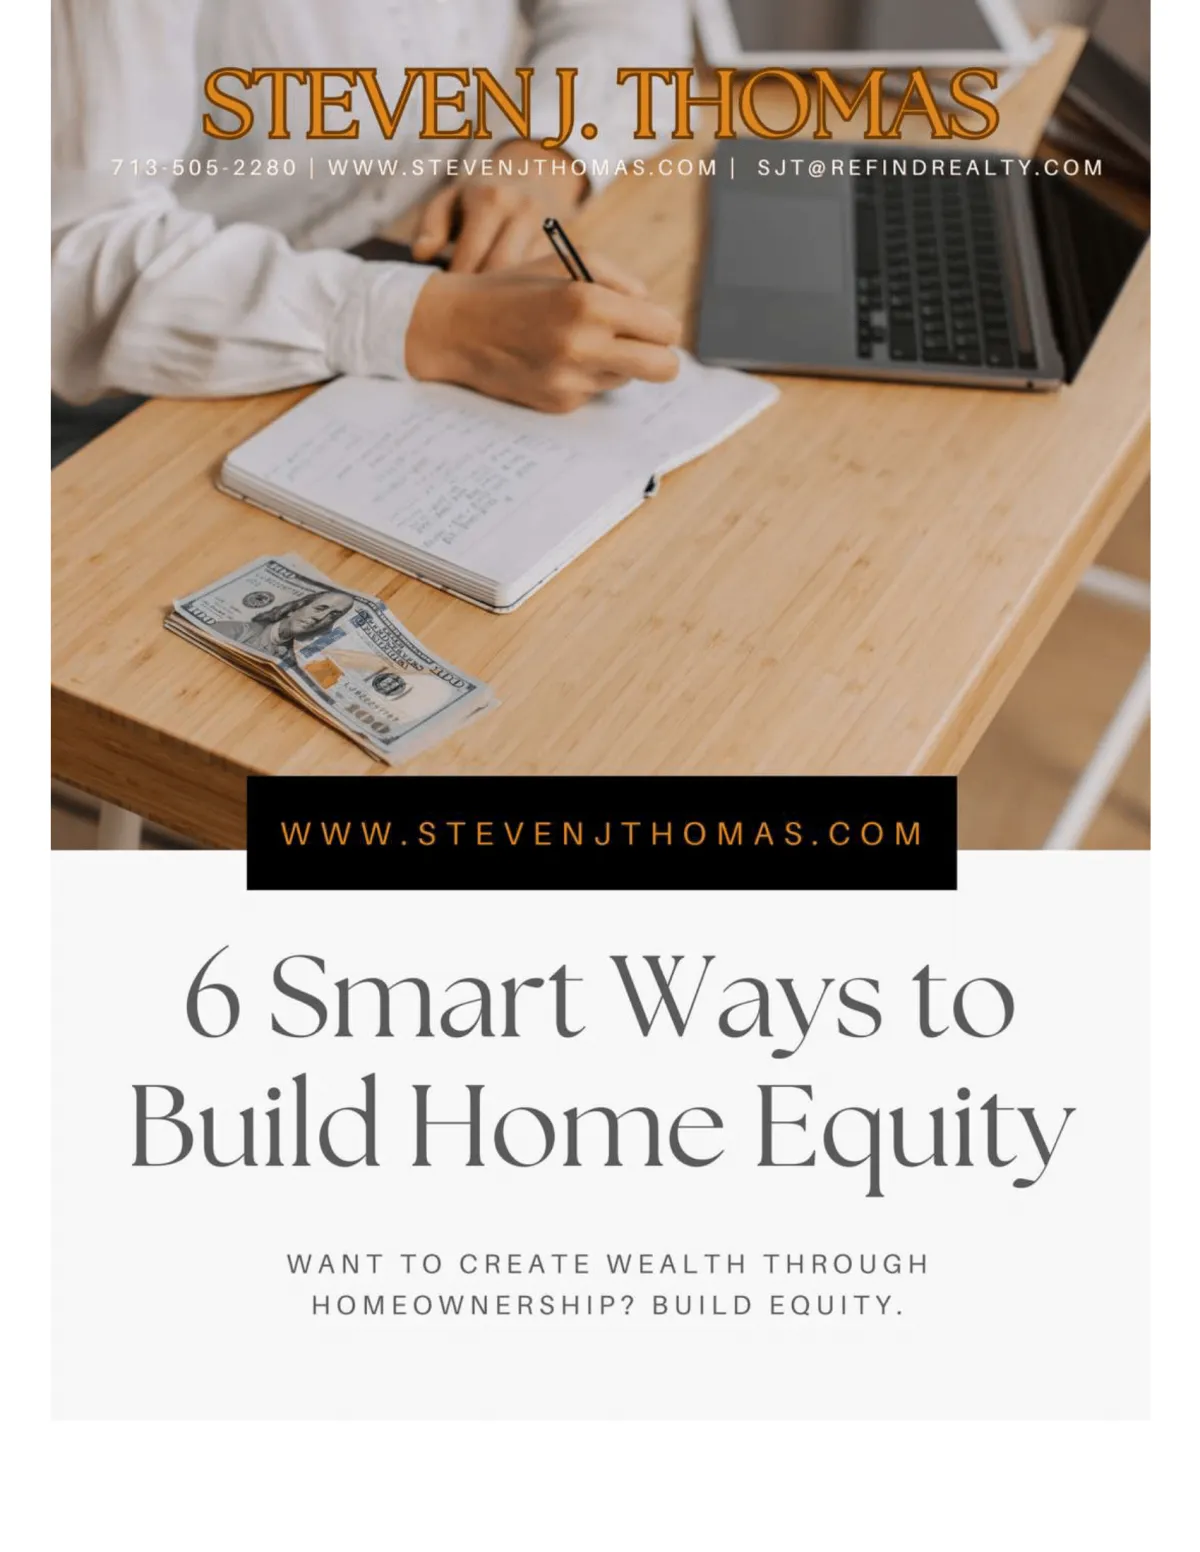 6 Smart Ways to Build Home Equity